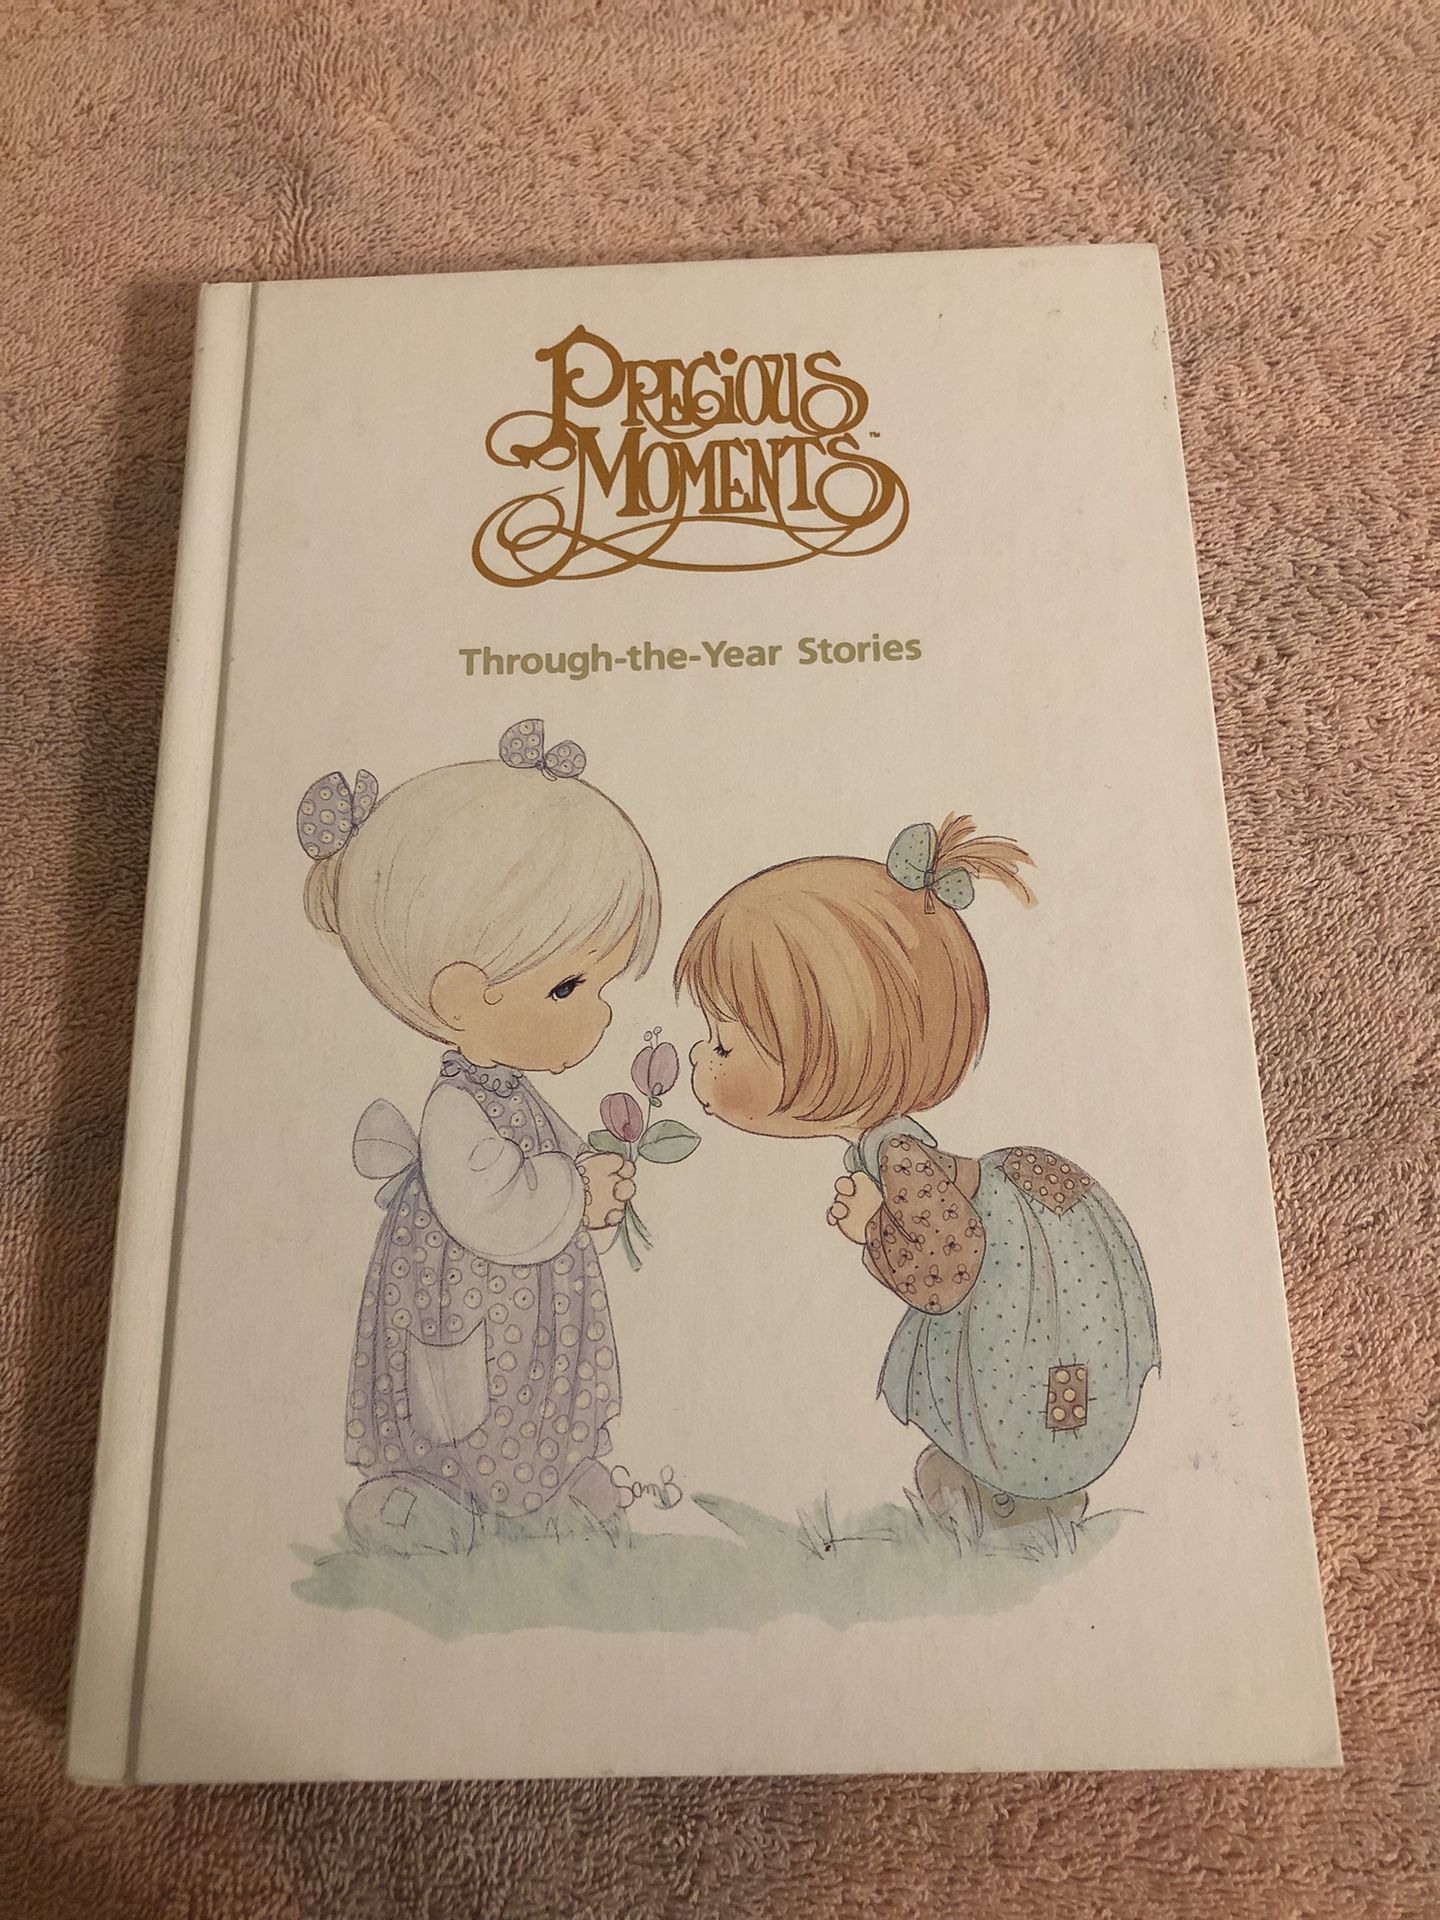 Vintage 1990 Precious Moments Through The Year Stories Hardcover